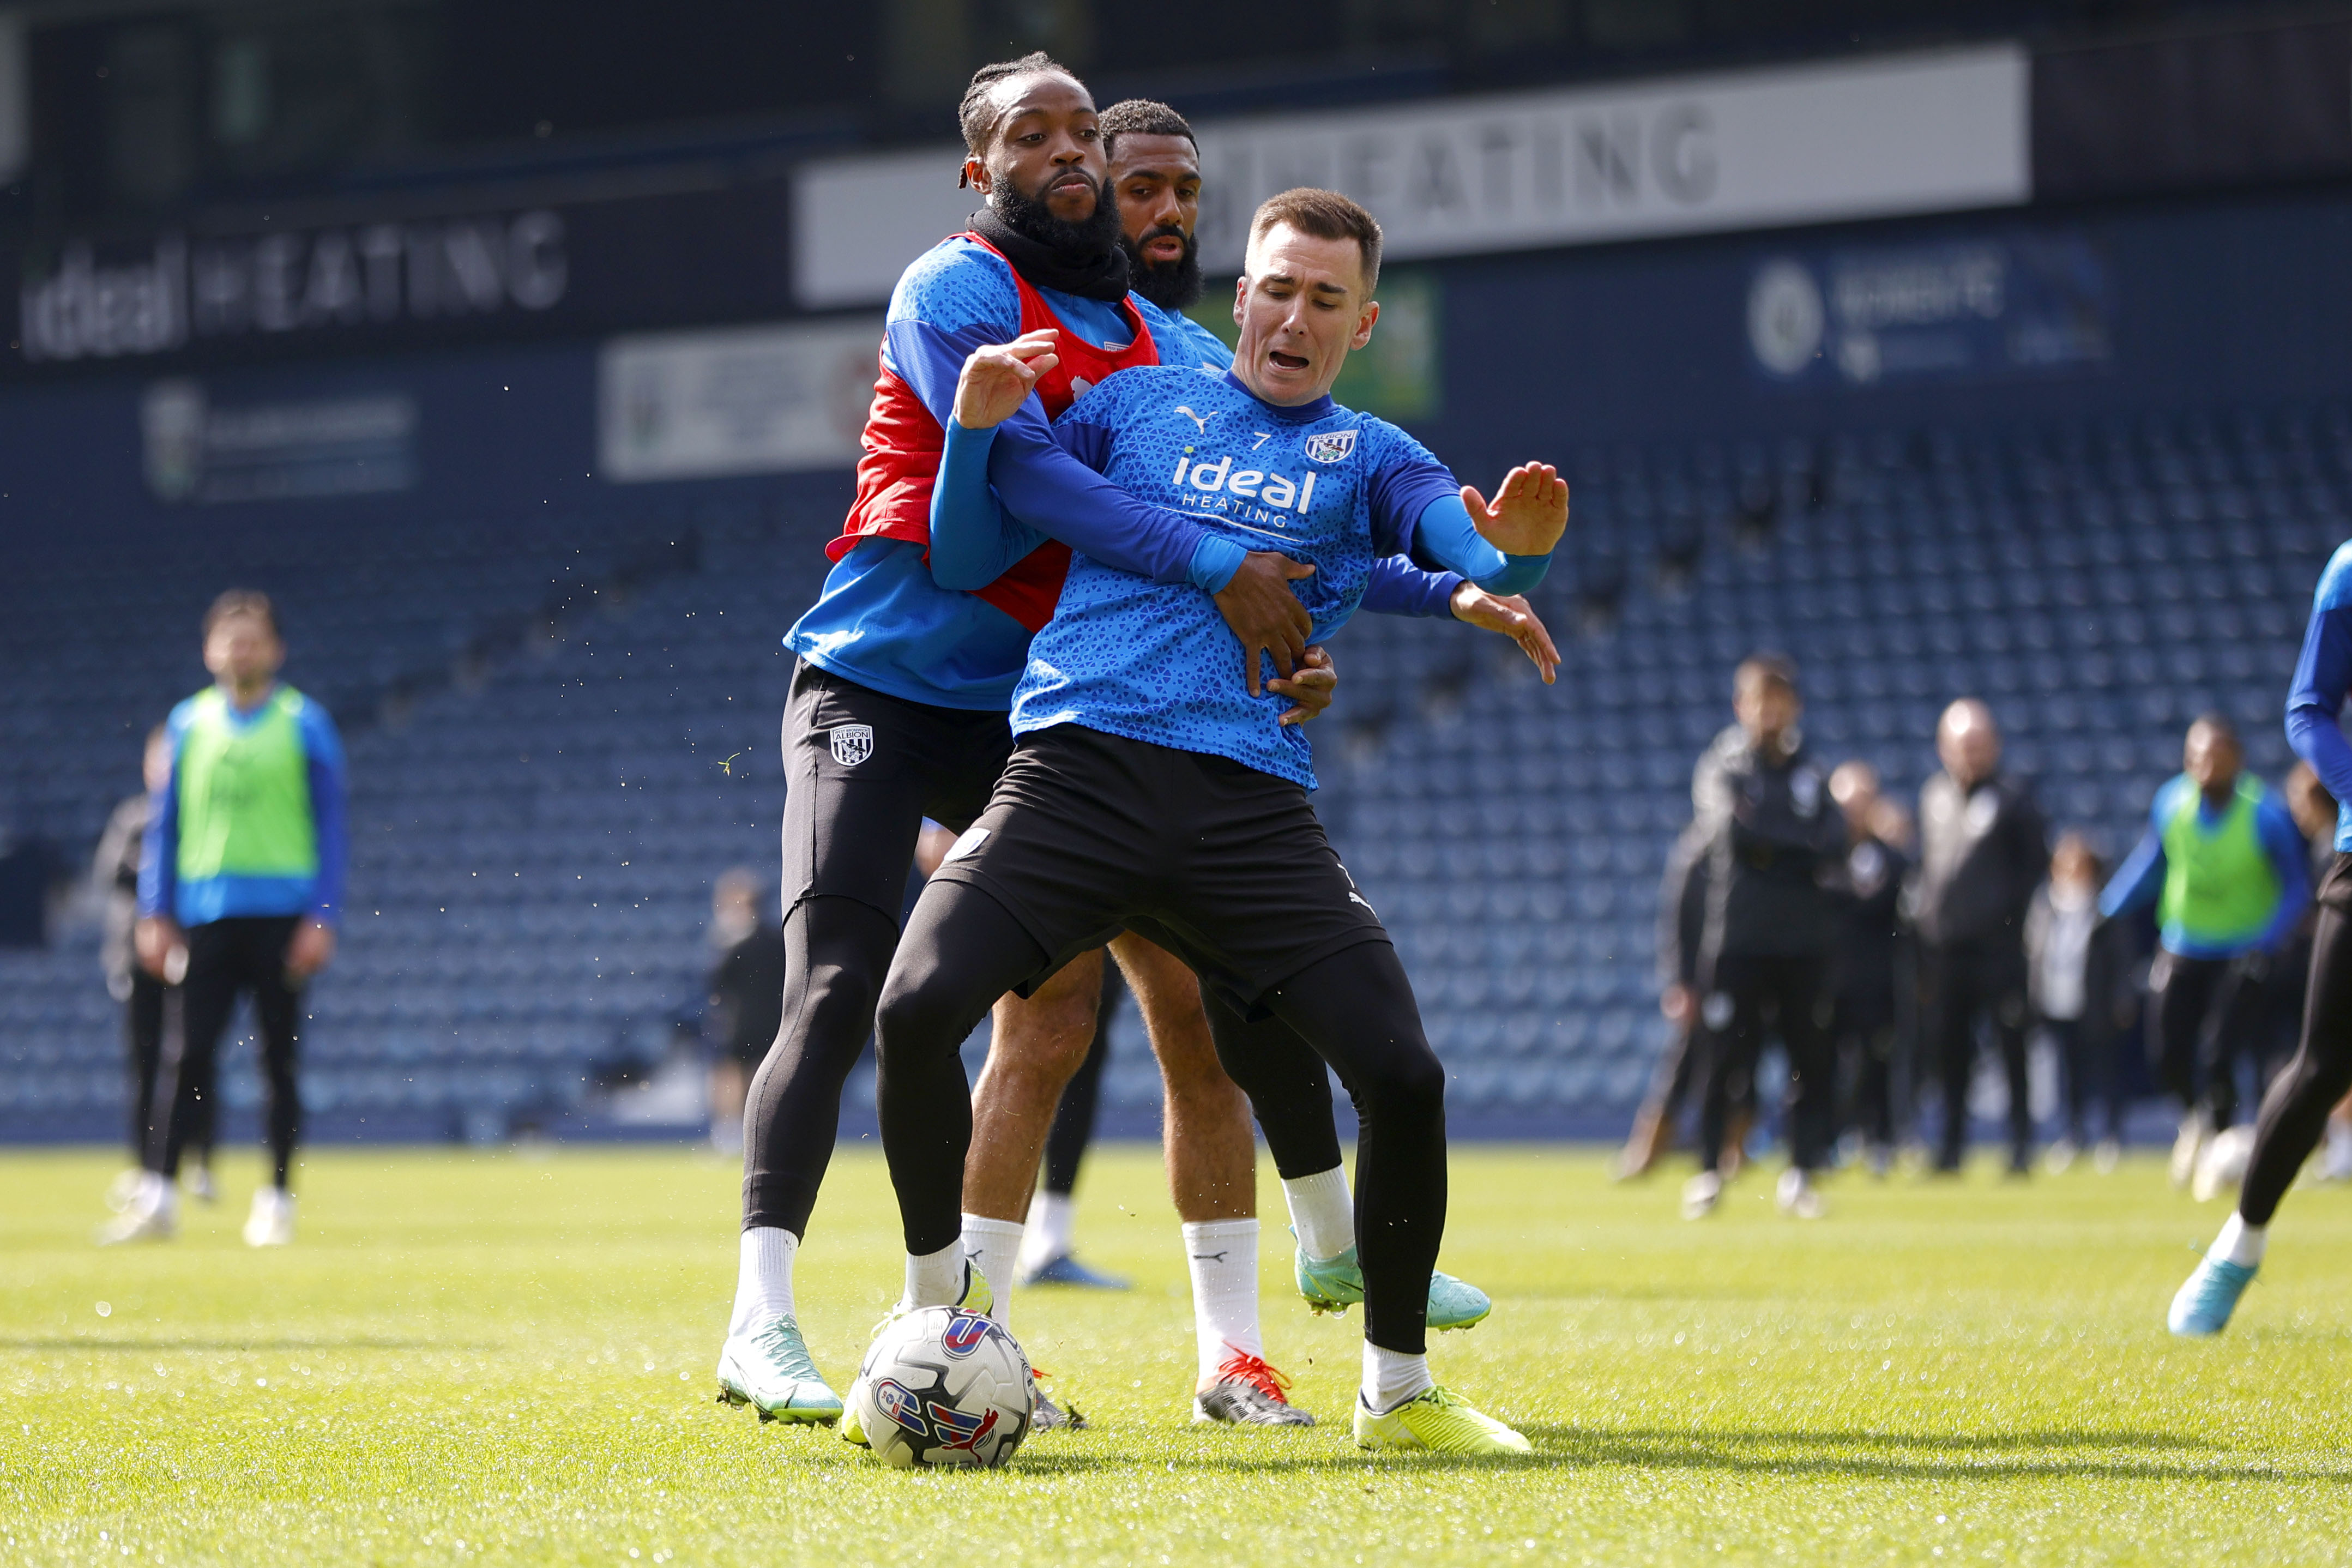 Nathaniel Chalobah and Jed Wallace fight for the ball during a training session at The Hawthorns